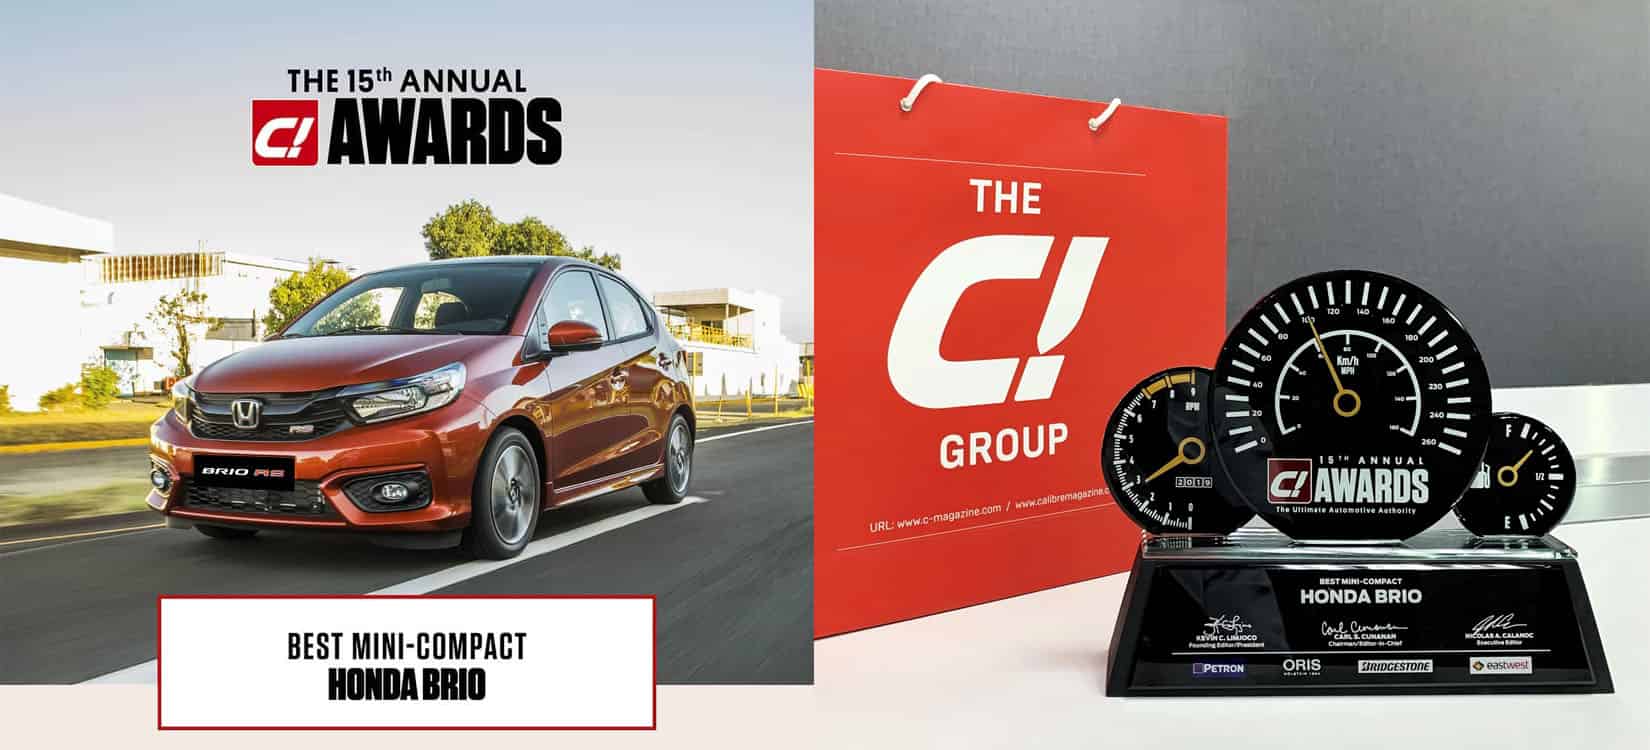 All-New Honda Brio Wins Best in Mini-Compact Award at the  15th Annual C! Awards